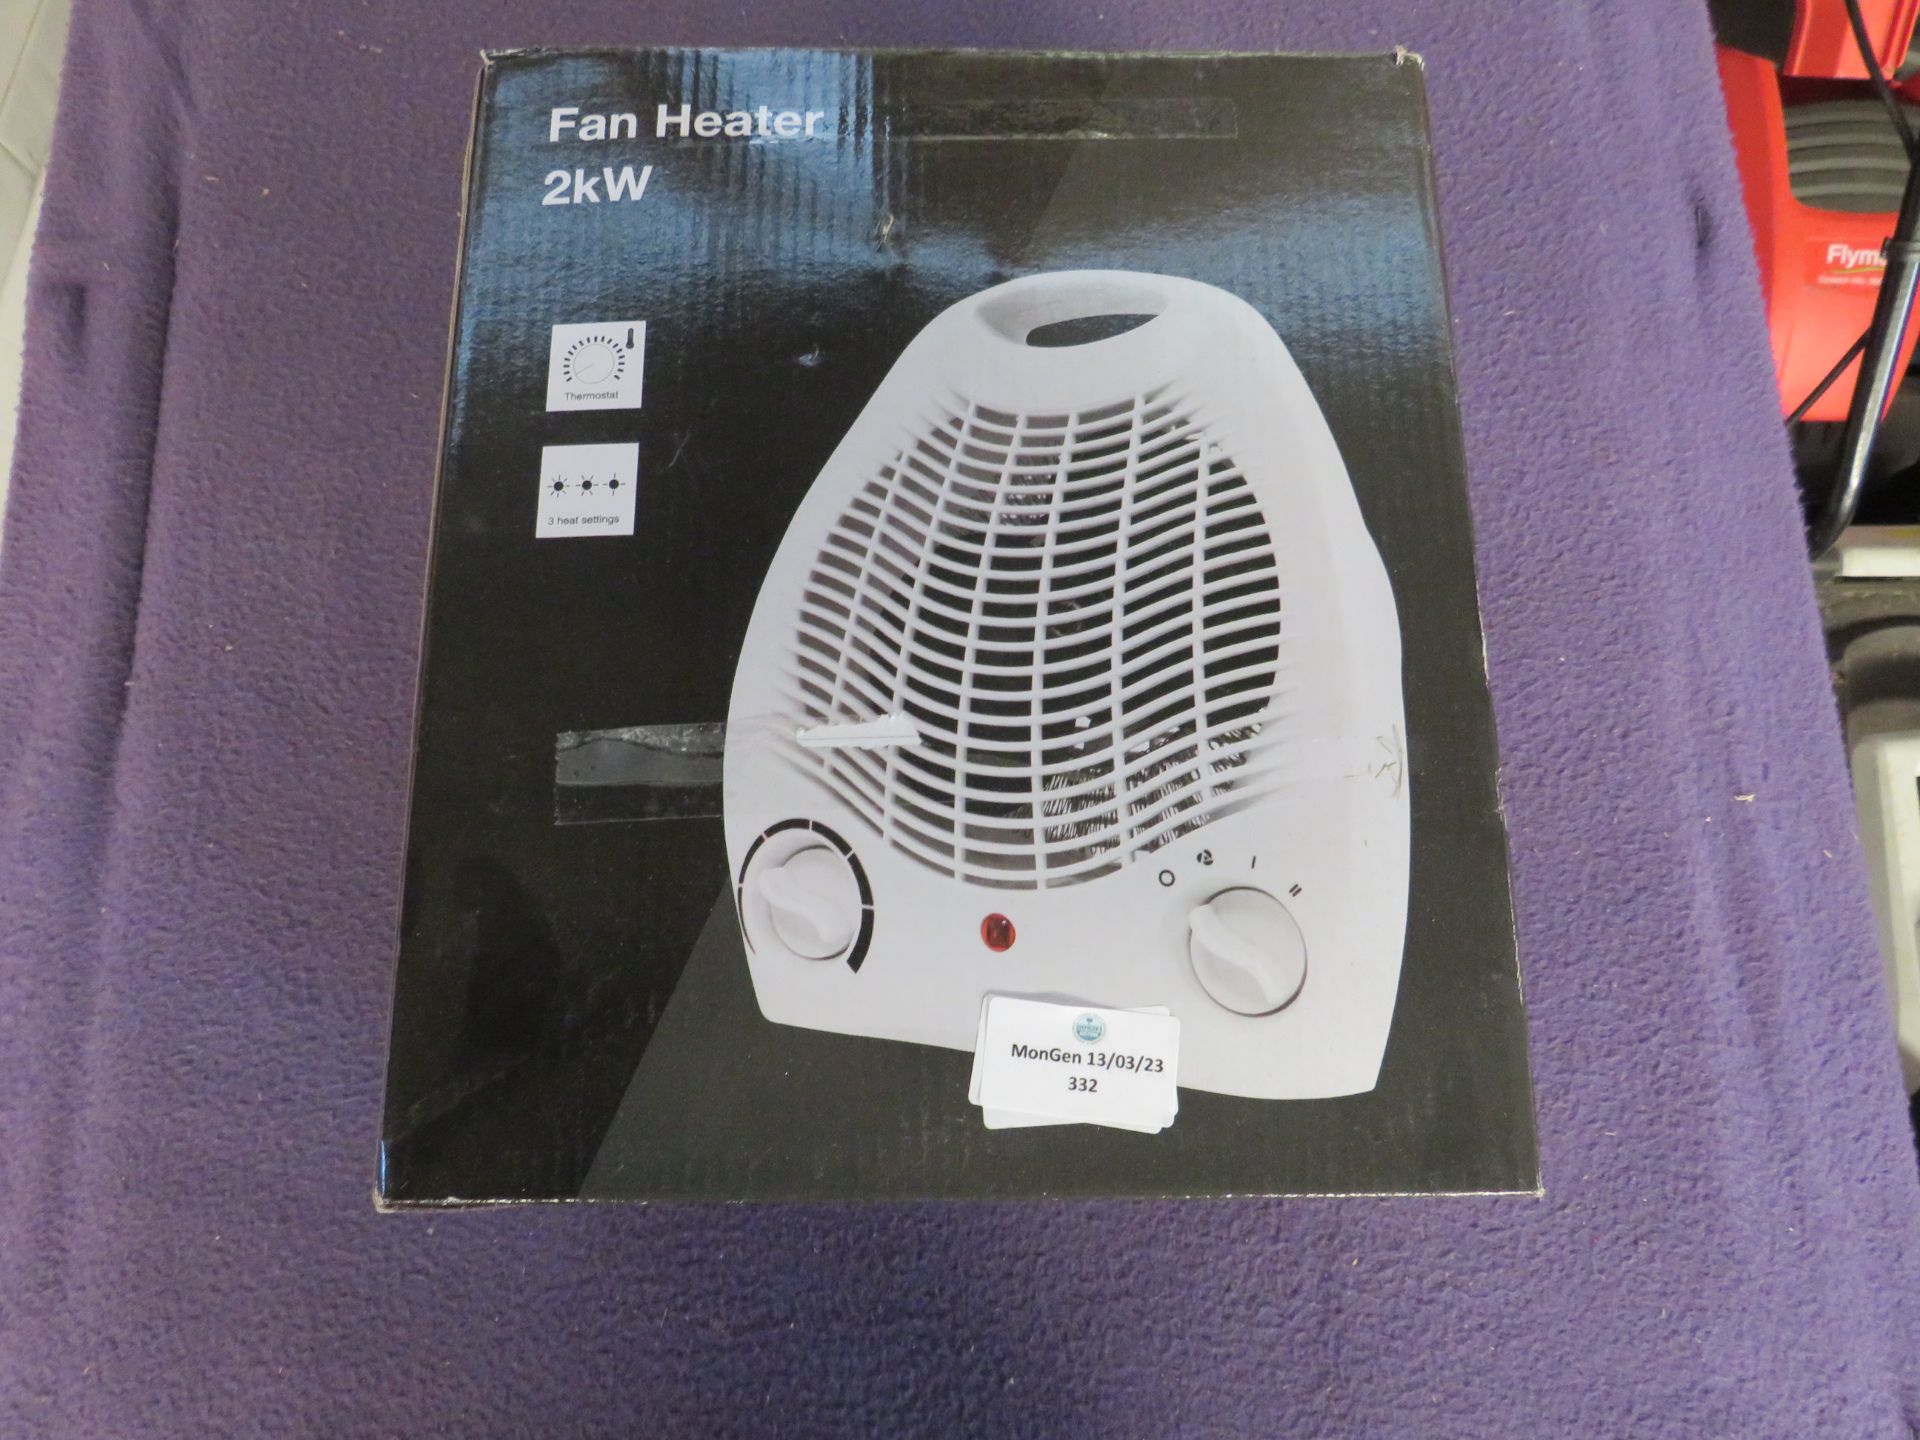 2kW Fan Heater - White - Untested & Boxed.